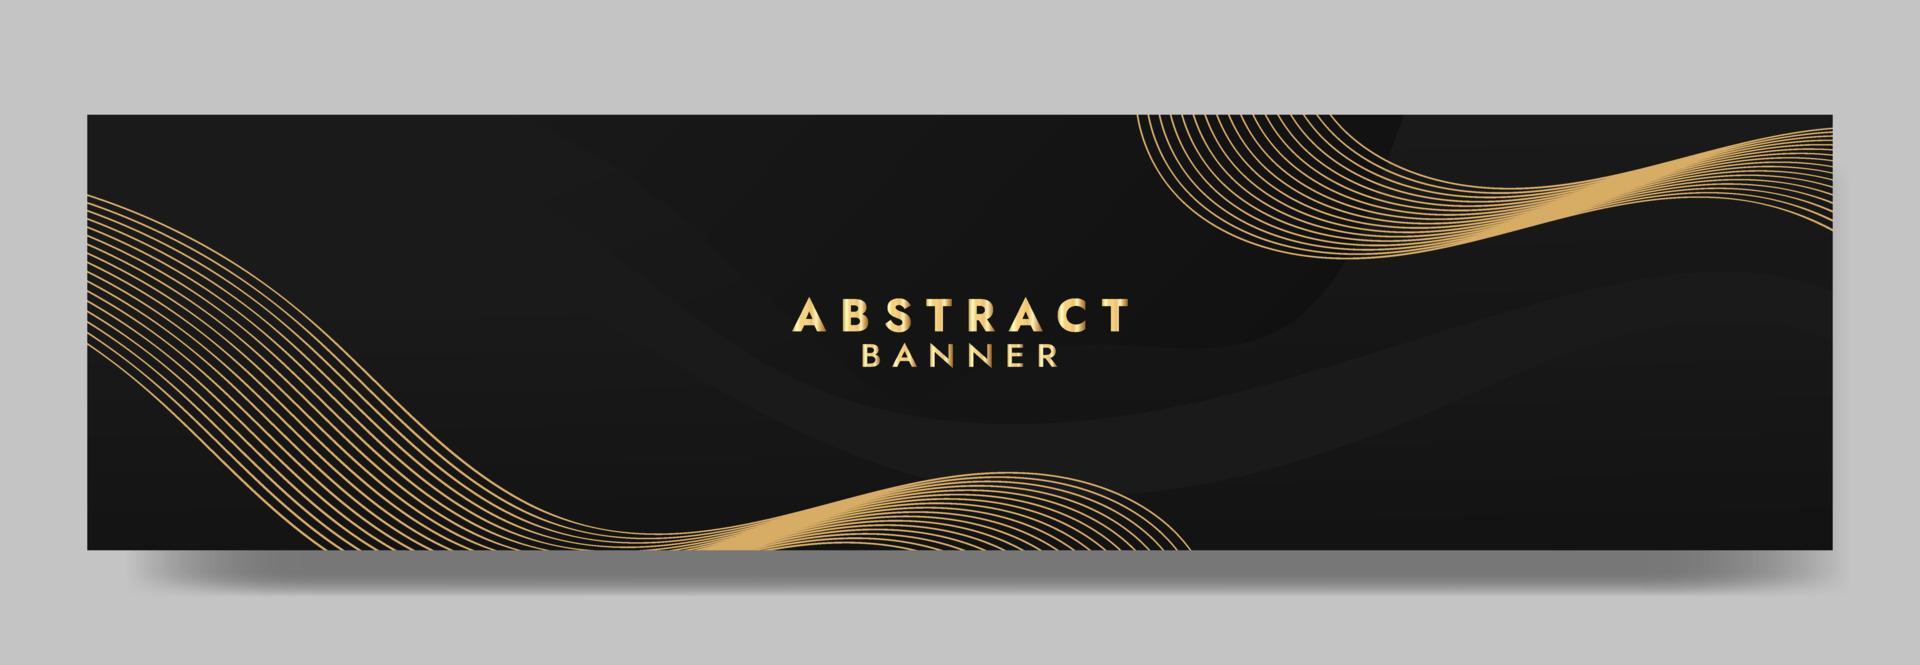 Abstract Black Luxury Fluid Wave Banner Template vector